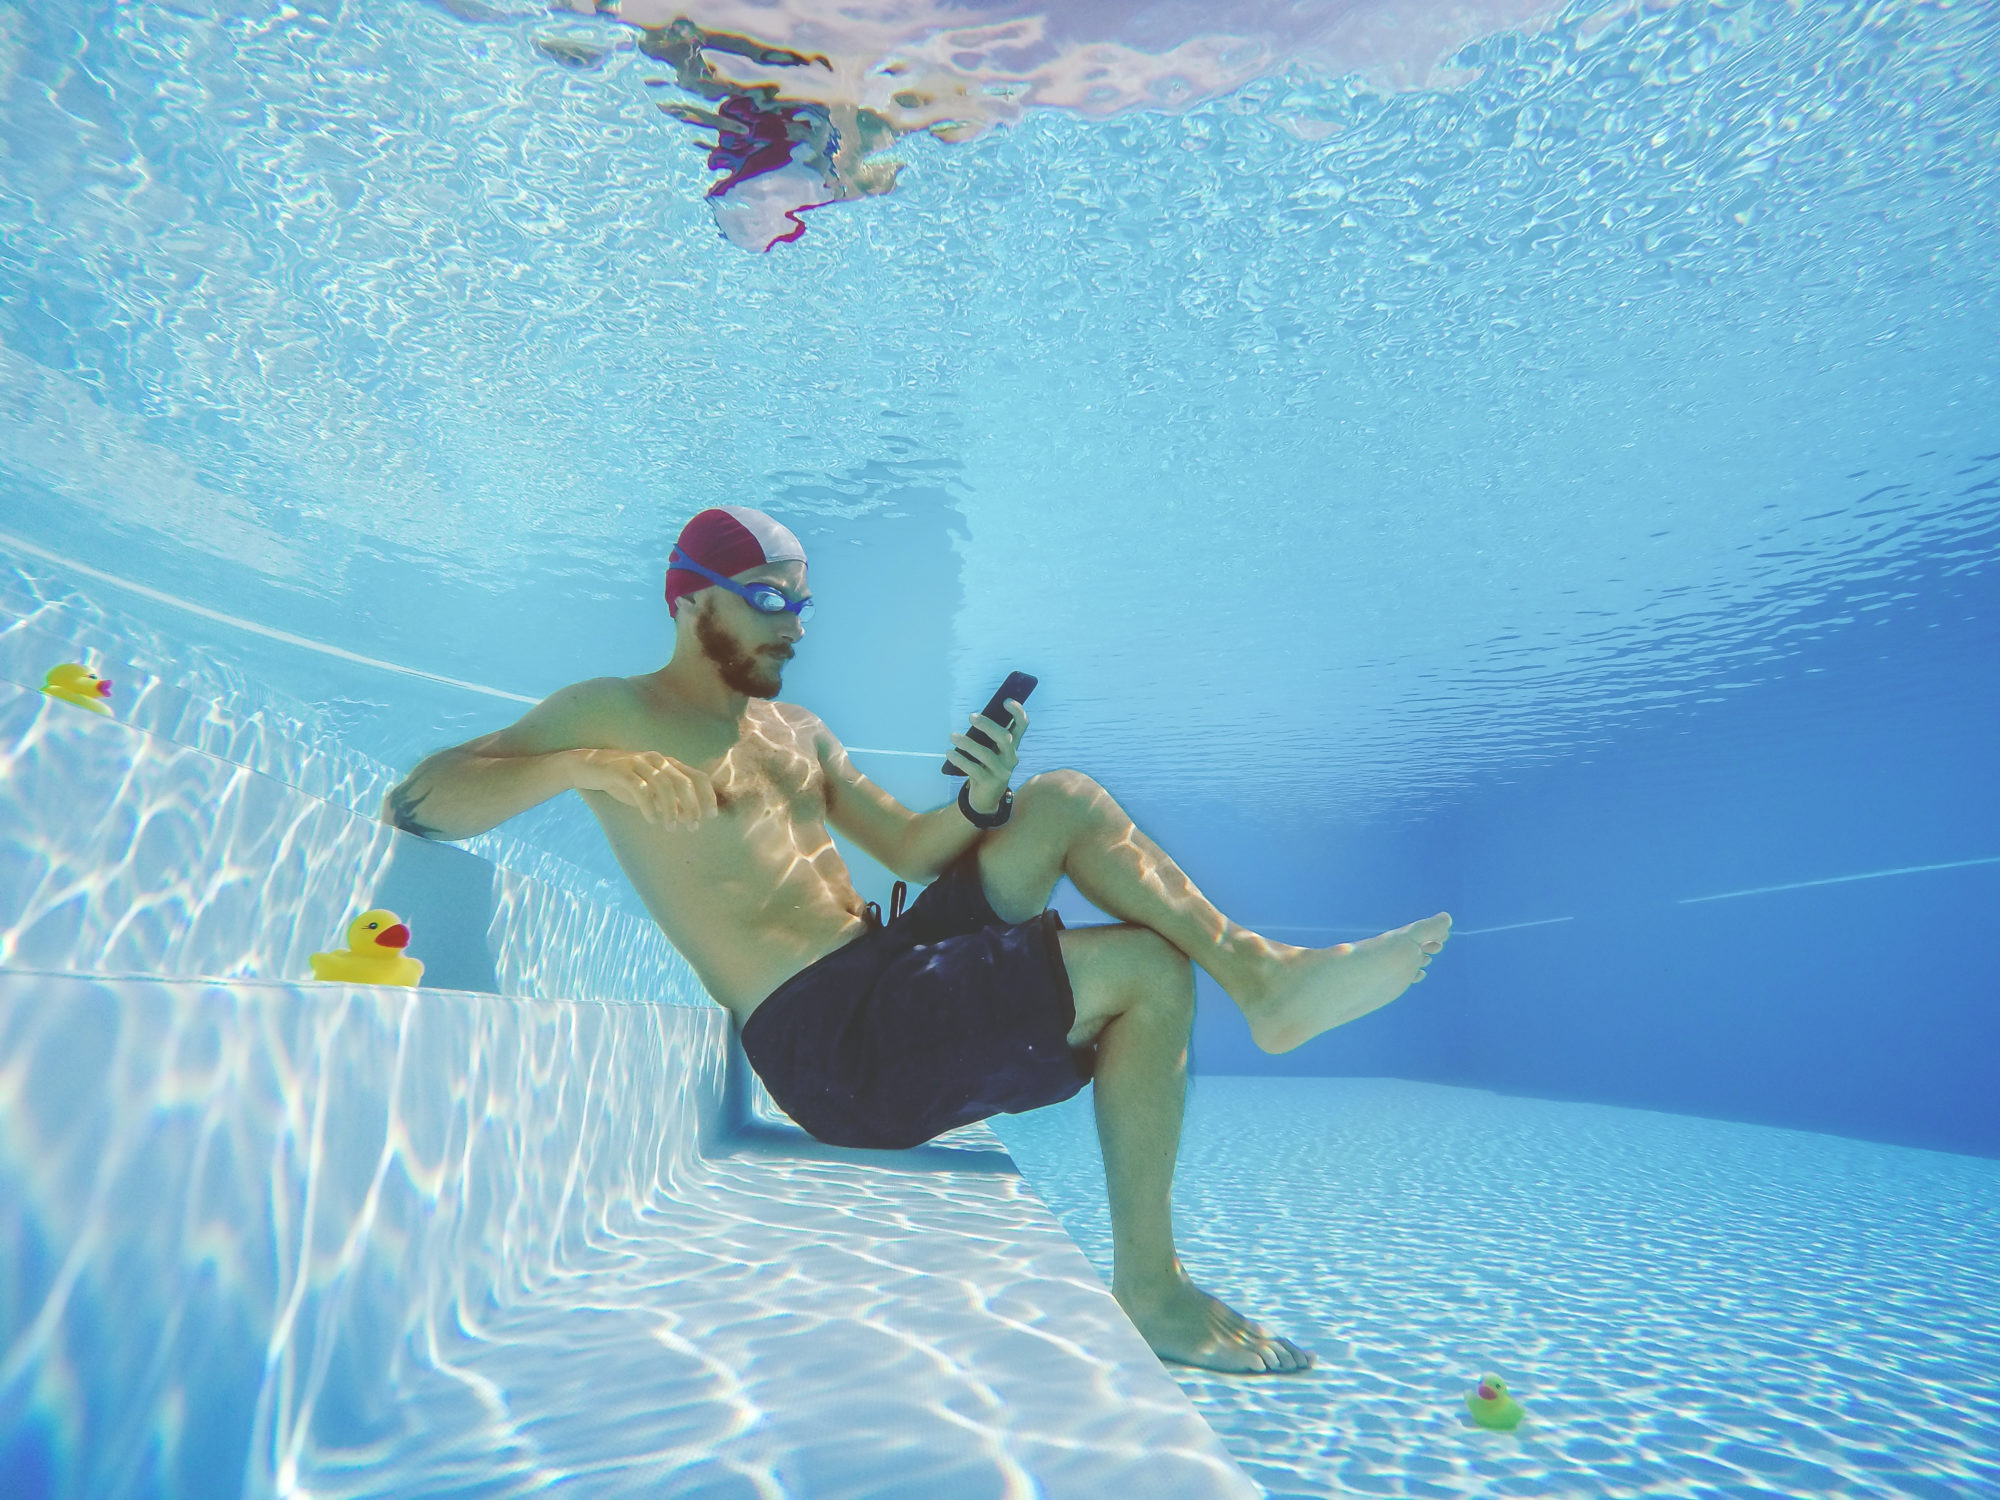 Addicted to social networking: with mobile phone underwater